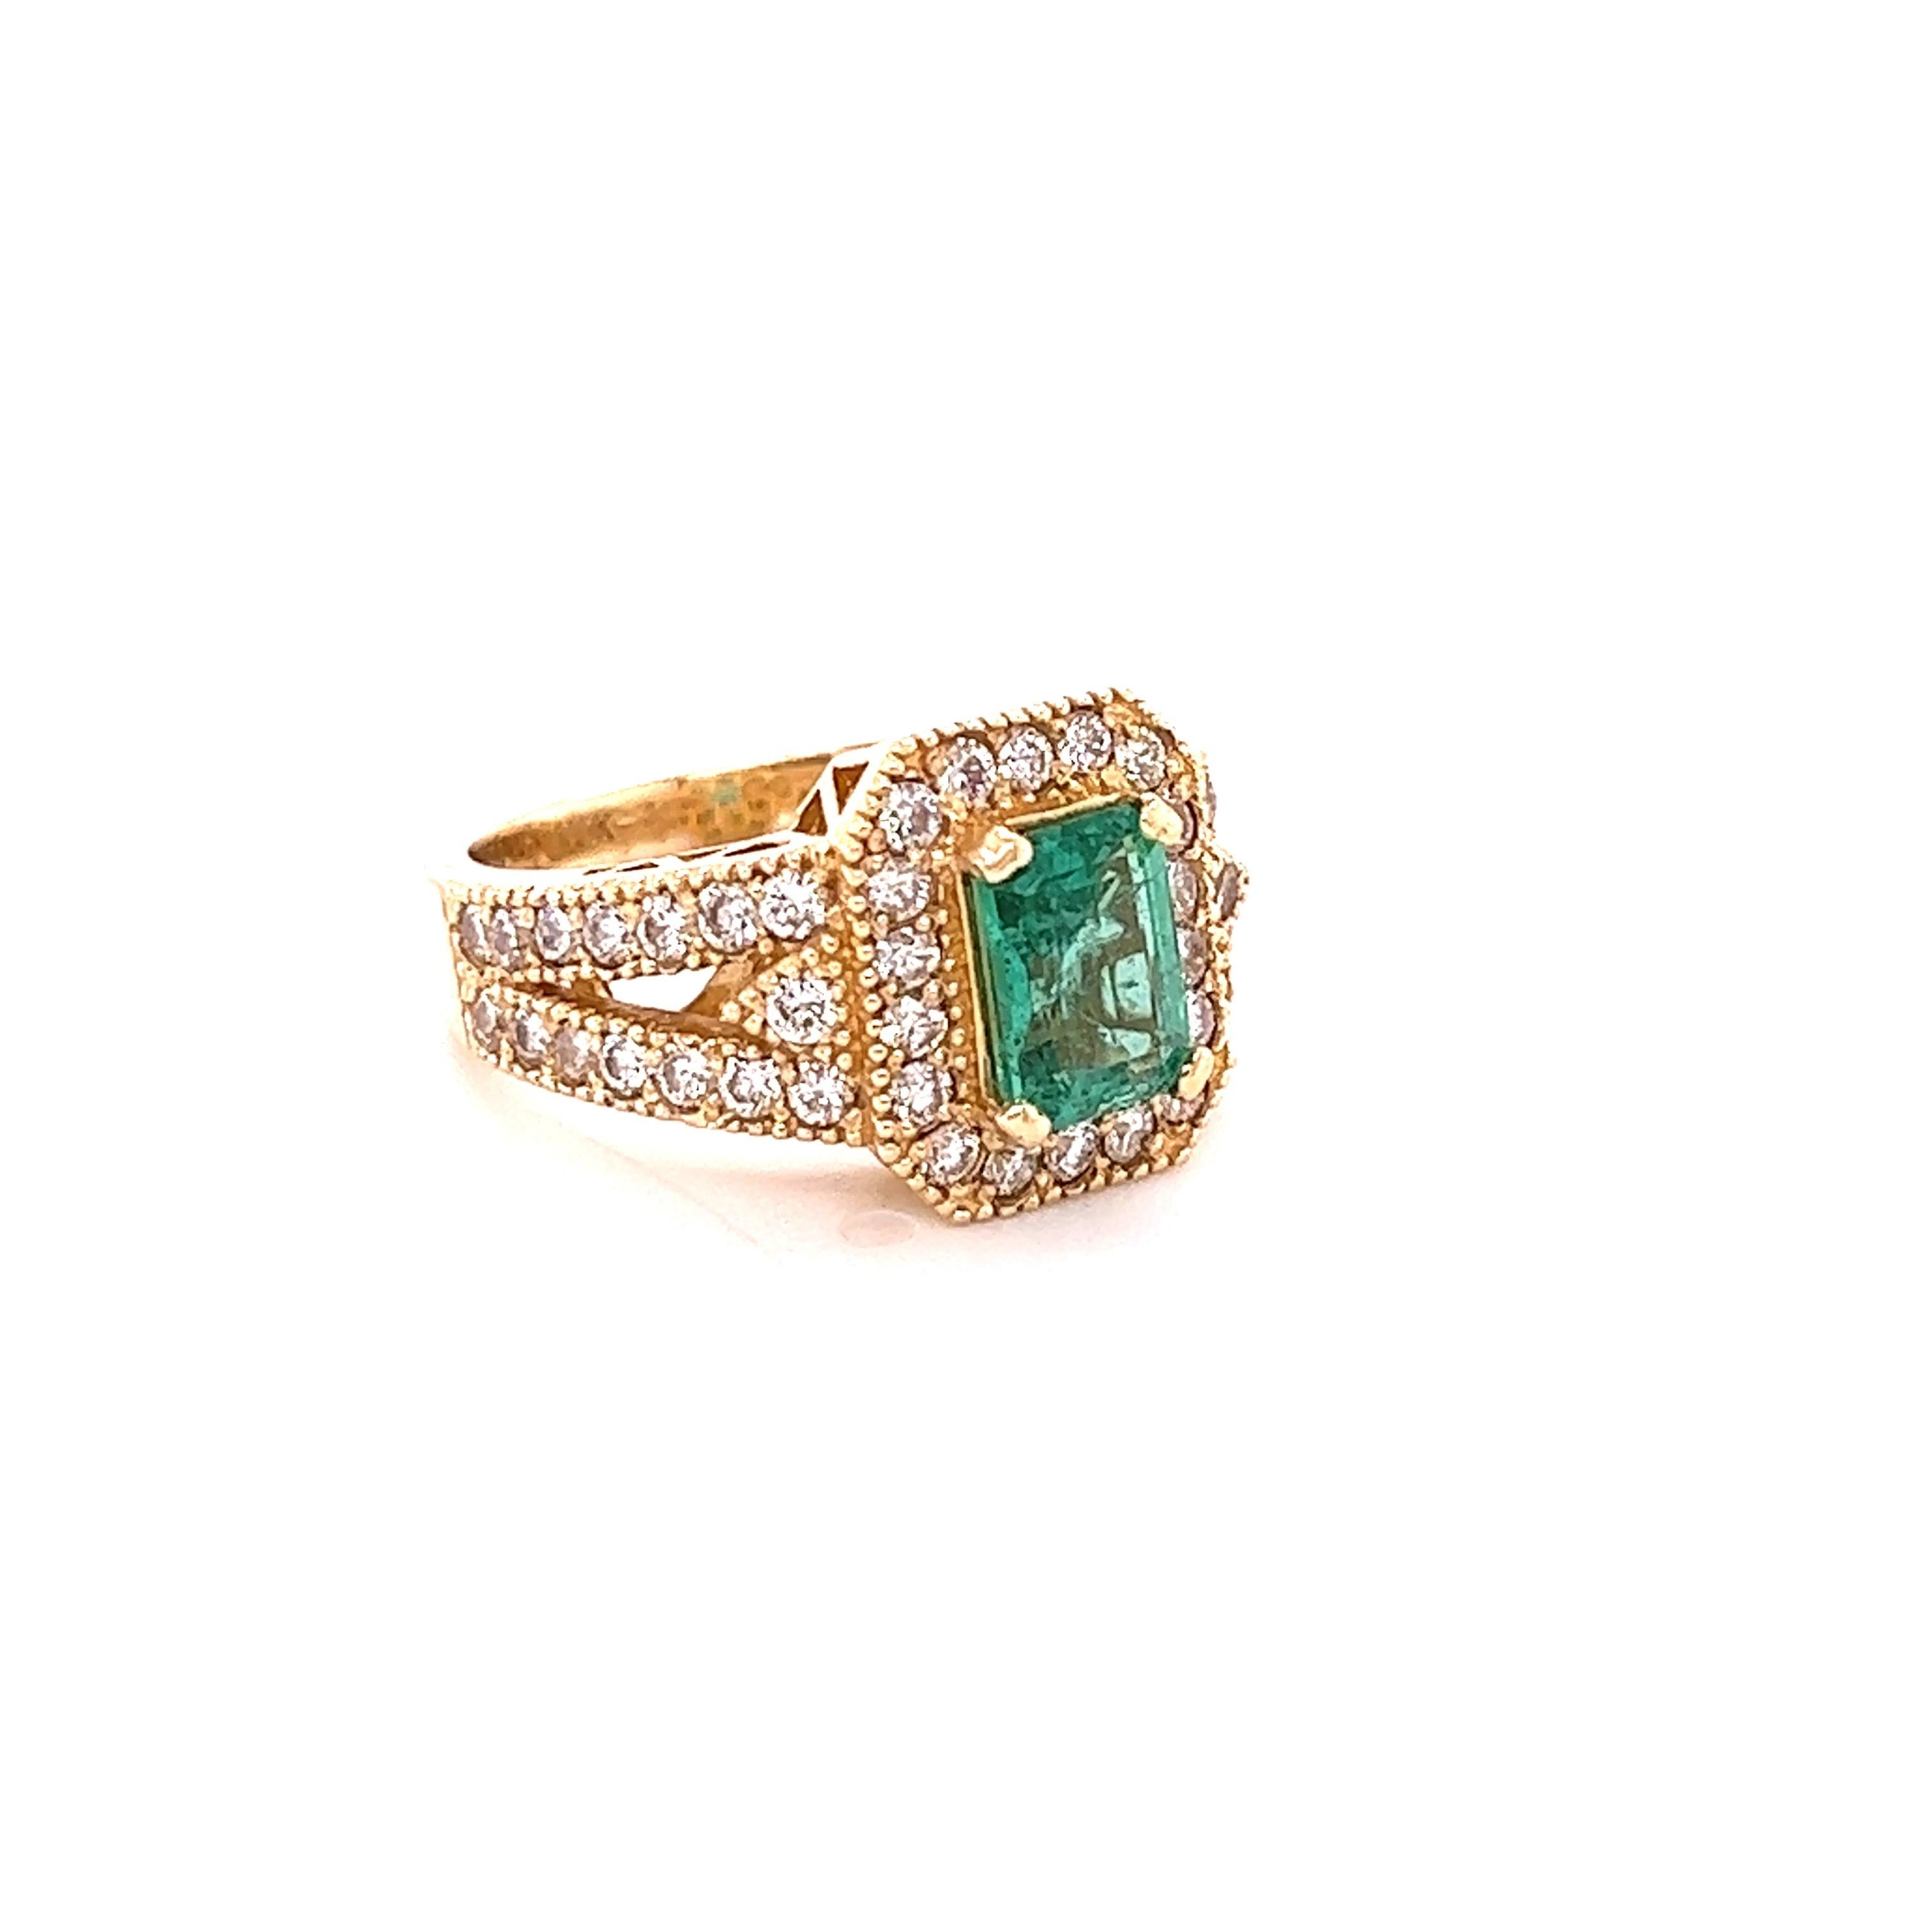 A beautiful, unique, Victorian-Inspired, 2.44 Carat Emerald and Diamond Ring in 14K Yellow Gold. 
The ring has been certified by GIA and the Certificate Number is: 5211083419
The Emerald Cut Emerald measures at 8 mm x 6 mm and weighs 1.24 Carats. It